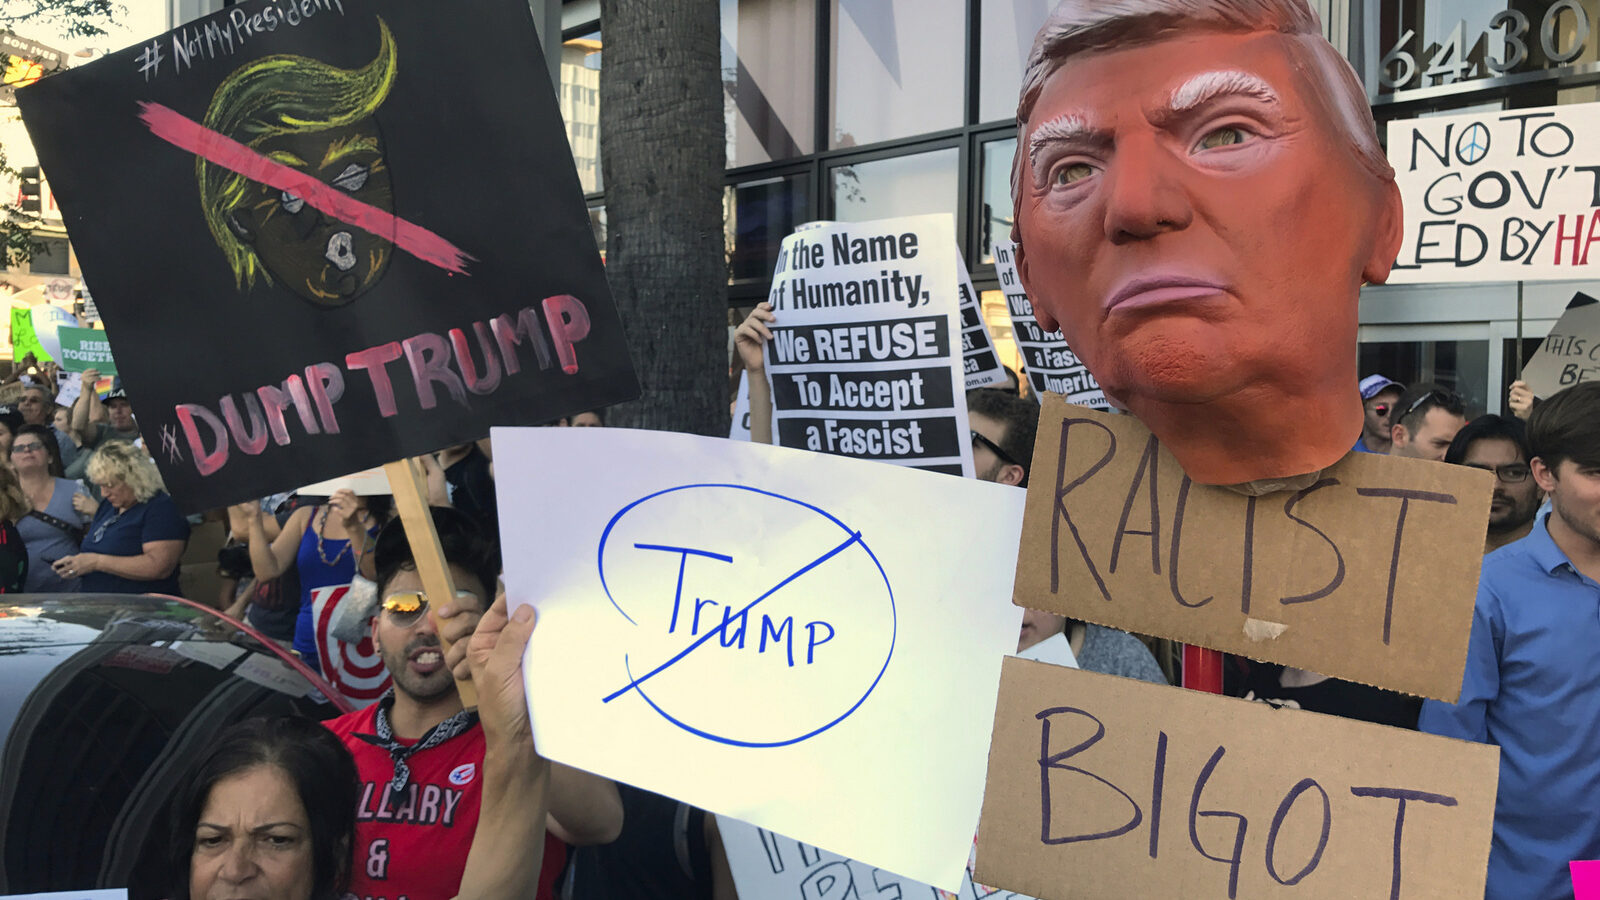 Protesters hold banners during a rally outside the CNN studios, in opposition to President-elect Donald Trump, in the Hollywood section of Los Angeles on Sunday, Nov .13, 2016. (AP Photo/Damian Dovarganes)